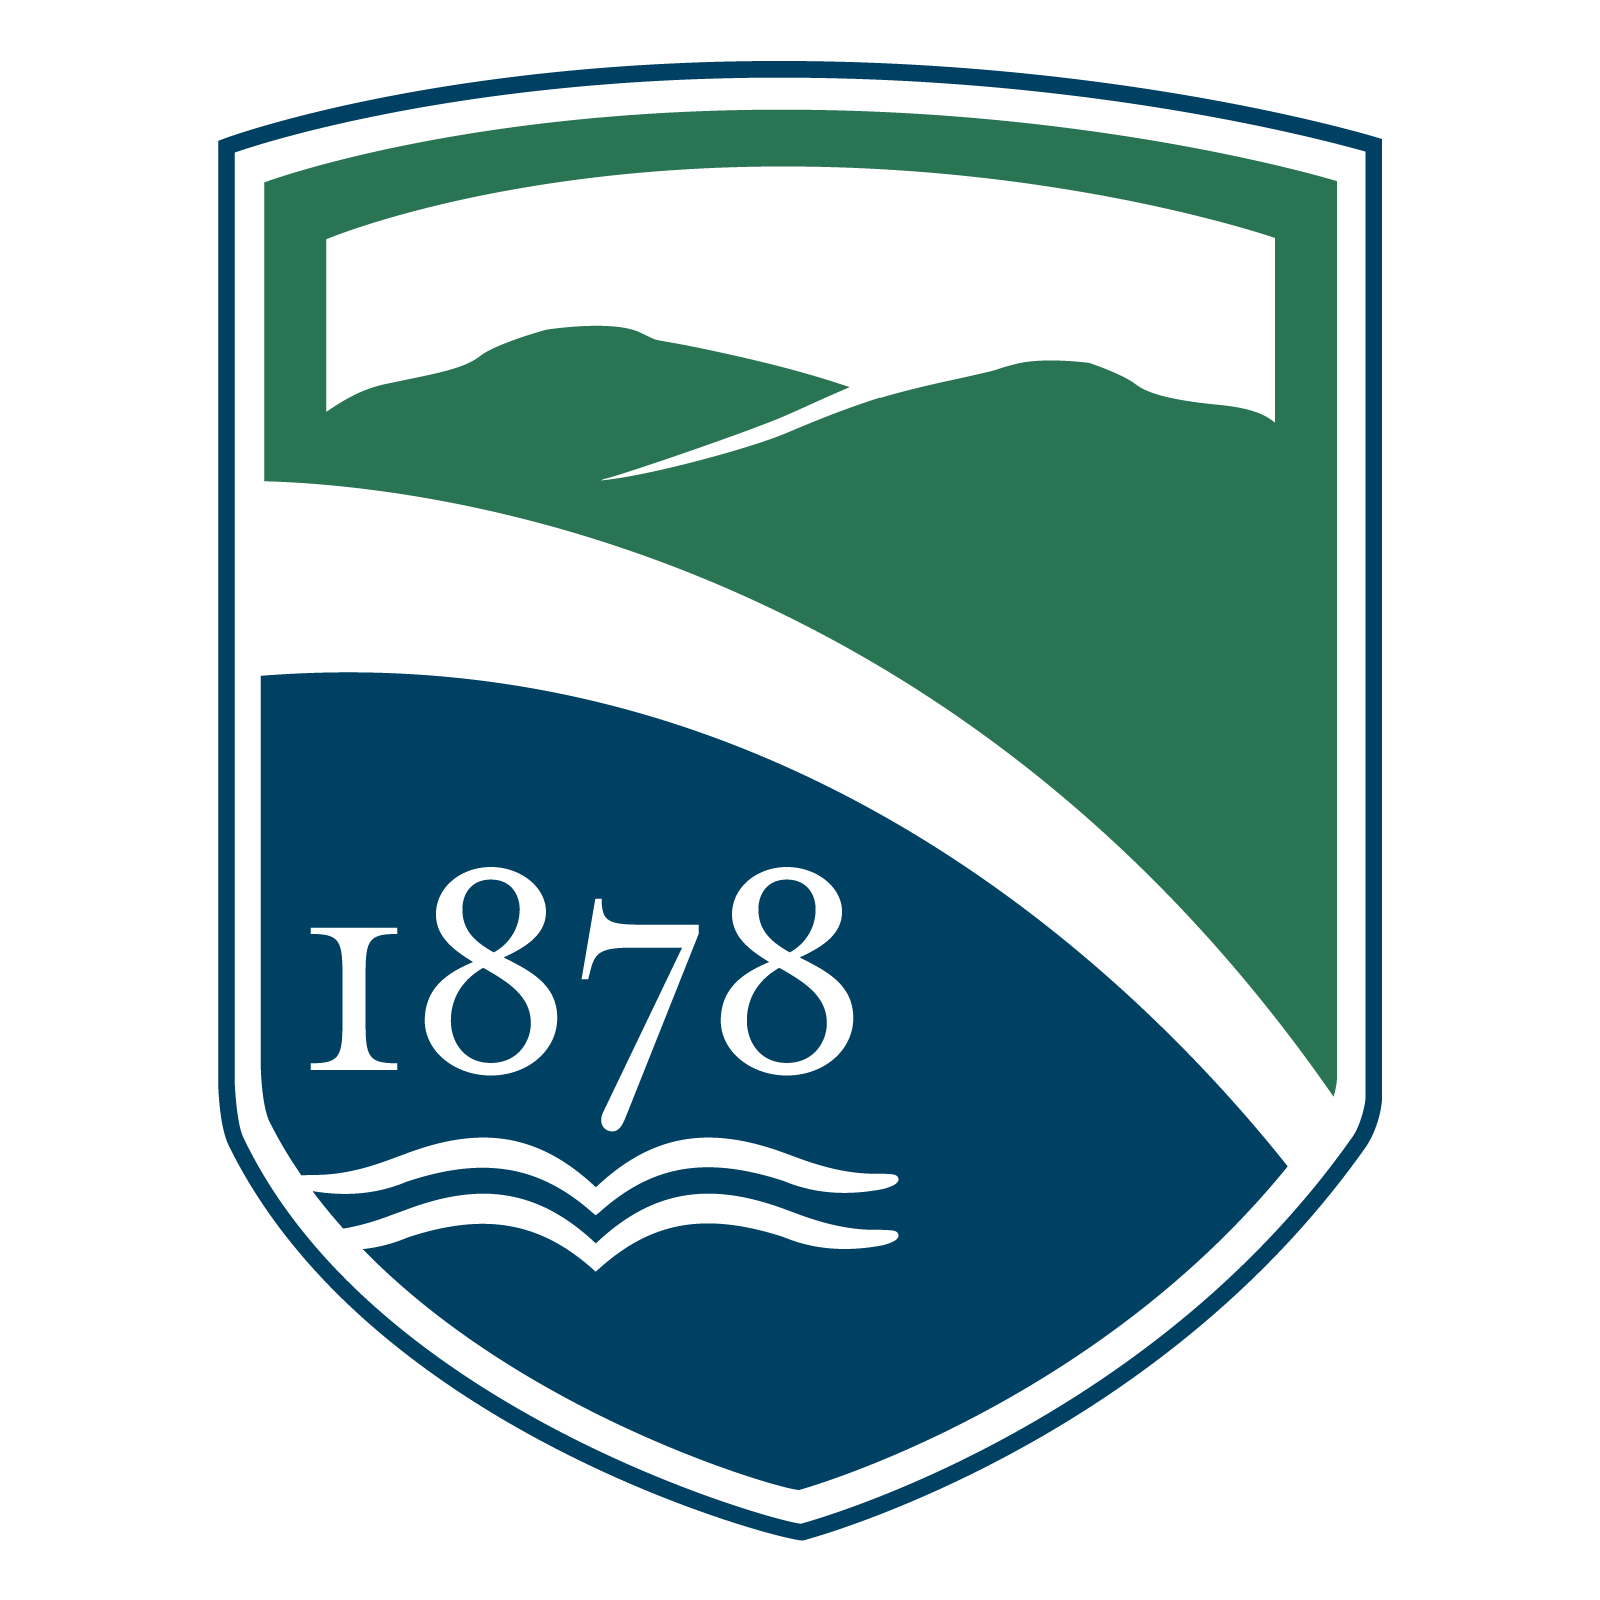 Champlain College shield logo in navy and green